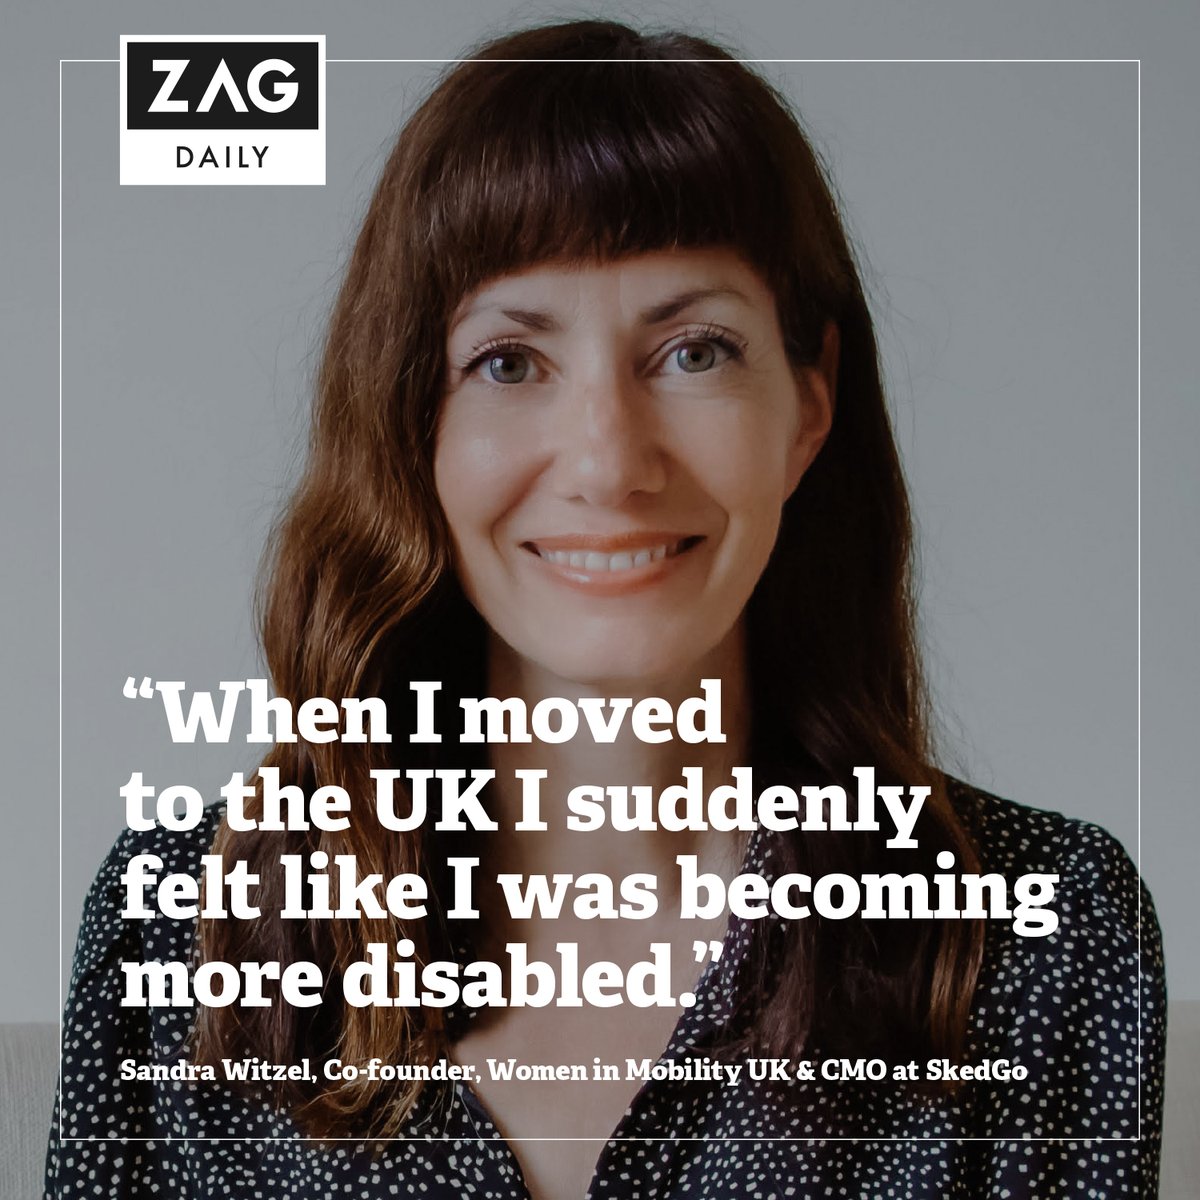 Coming up in #21 of our ZagWeekly newsletter we examine the personal challenges Sandra's faced as a disabled transport user, why 9 in 10 women fear cycling in UK cities & what impact did New Mobility have on Earth Day 2024? Subscribe here: zagdaily.com/zag-weekly/